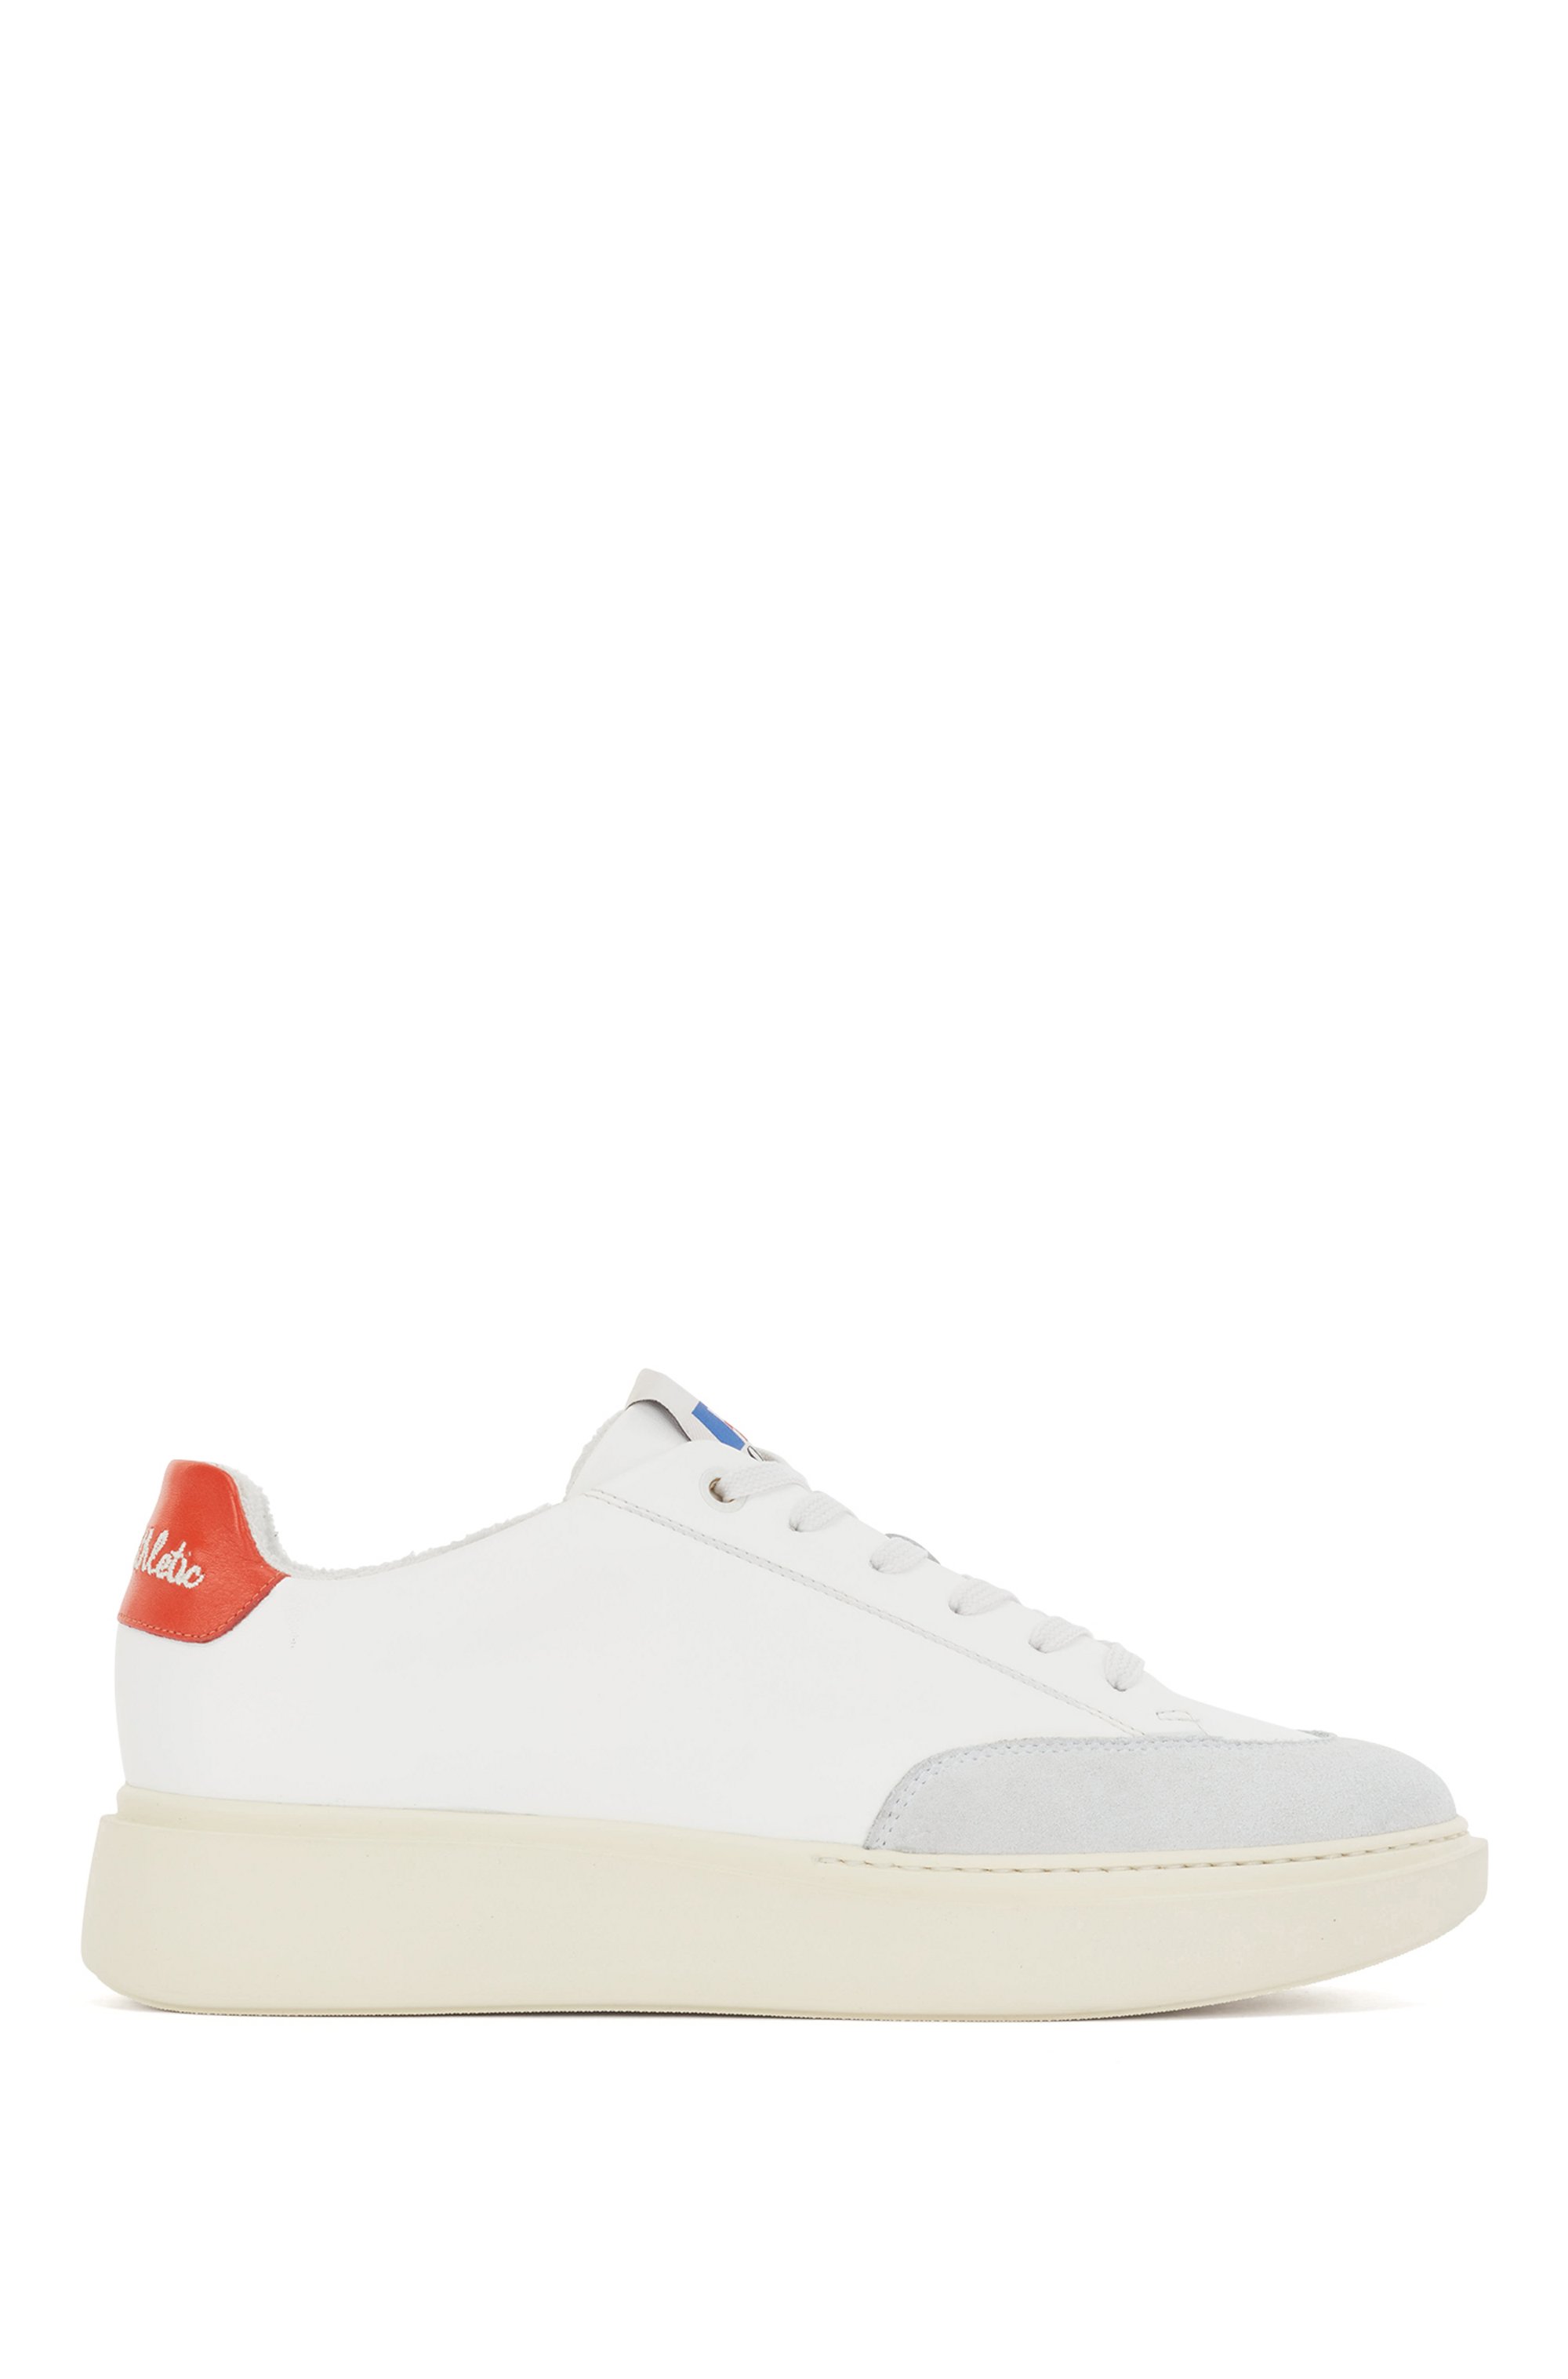 Faux-leather trainers with suede trims and collaborative branding, White